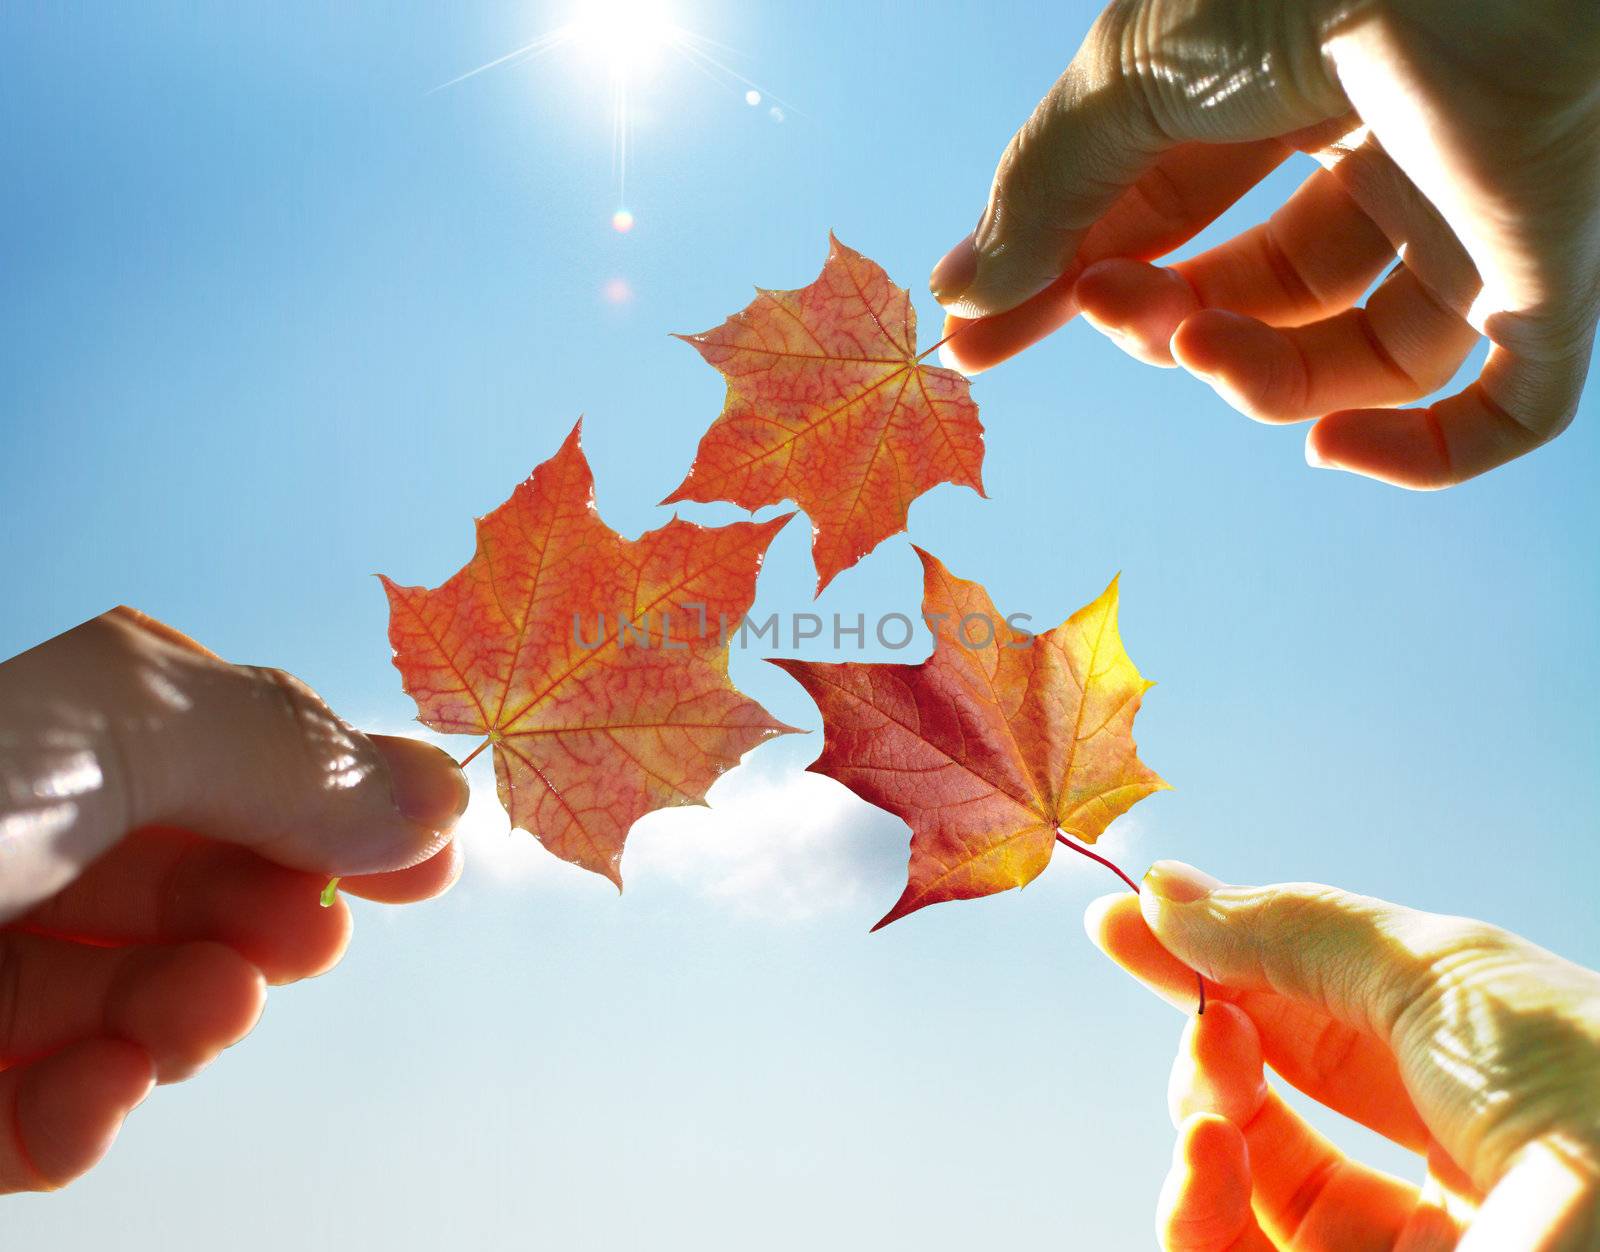 NIce picture with three leaves and hands